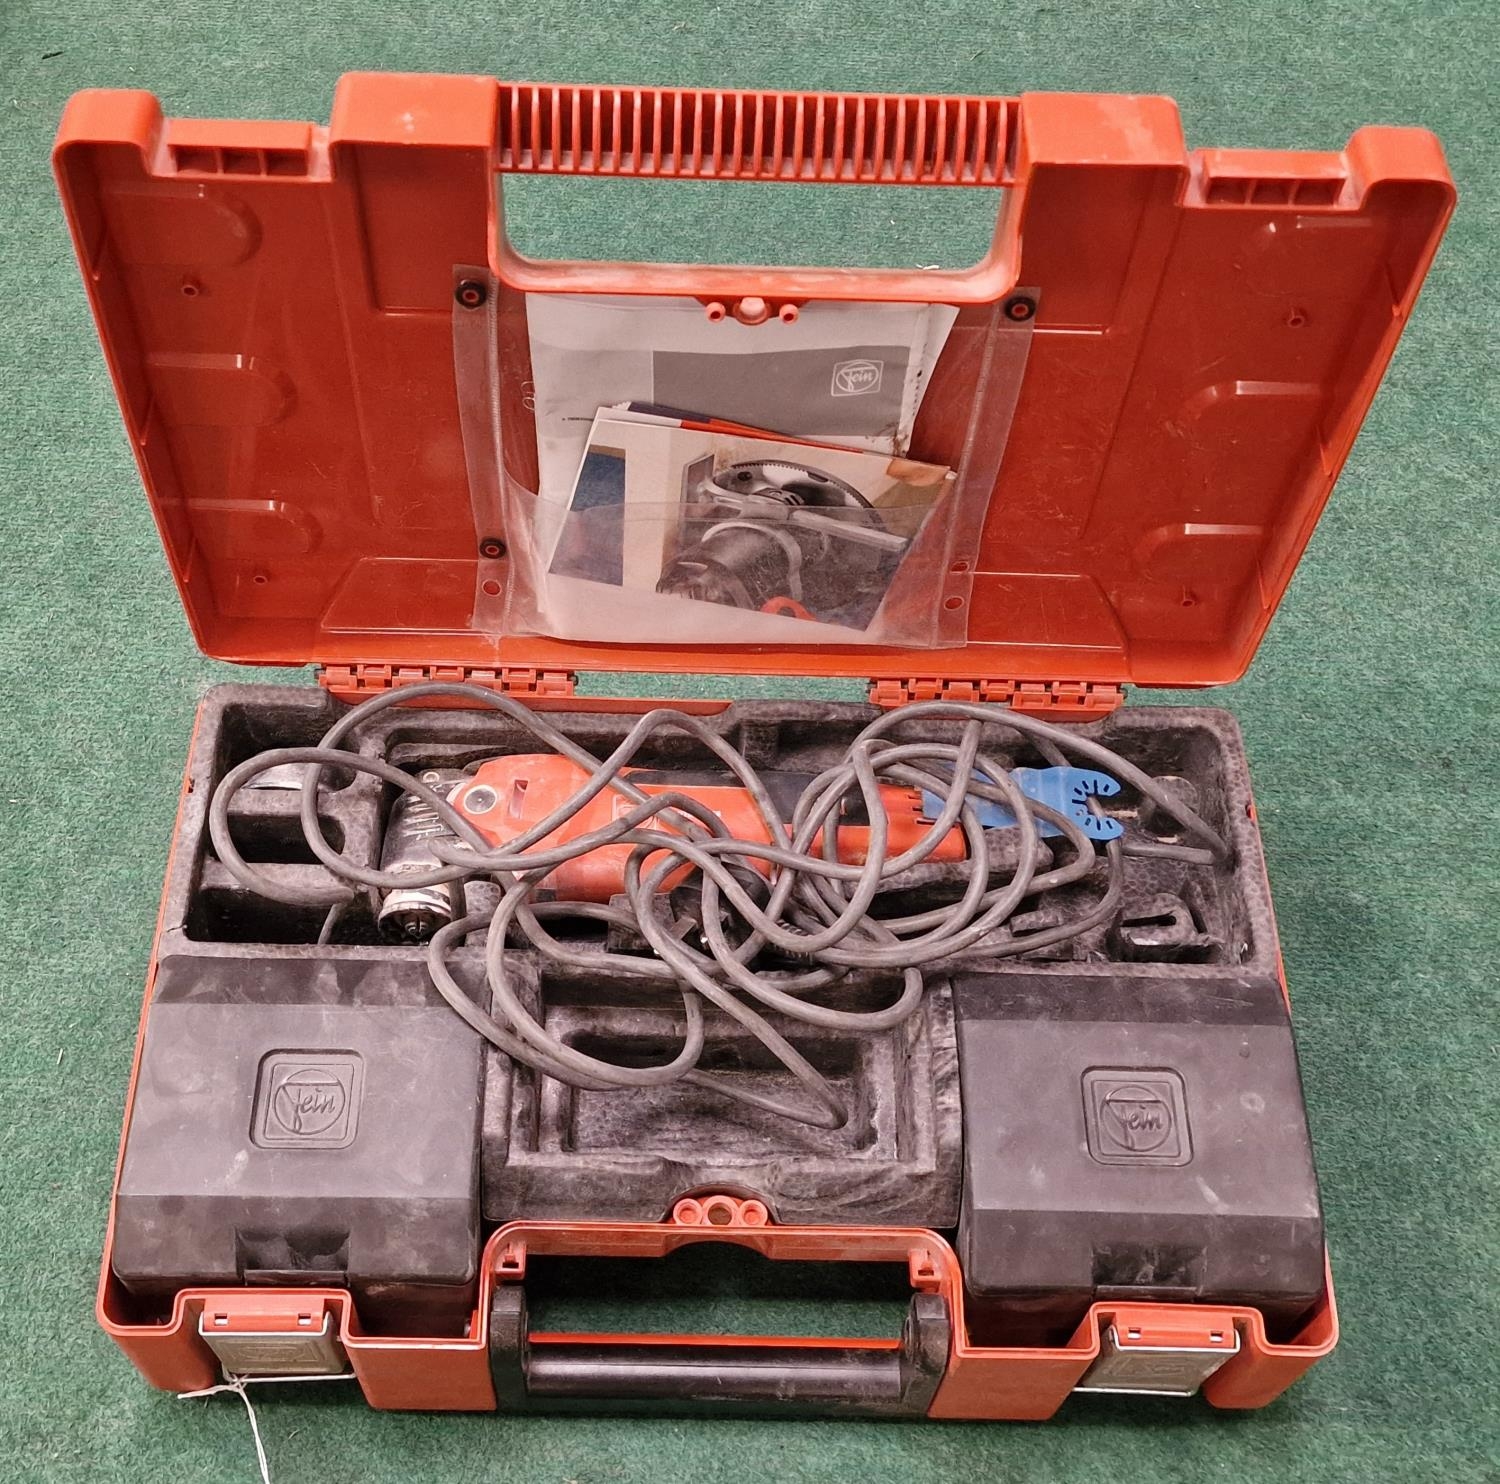 FEIN MultiMaster MultiTool Running on 240 volts and comes in carry case. Powered up when plugged in.